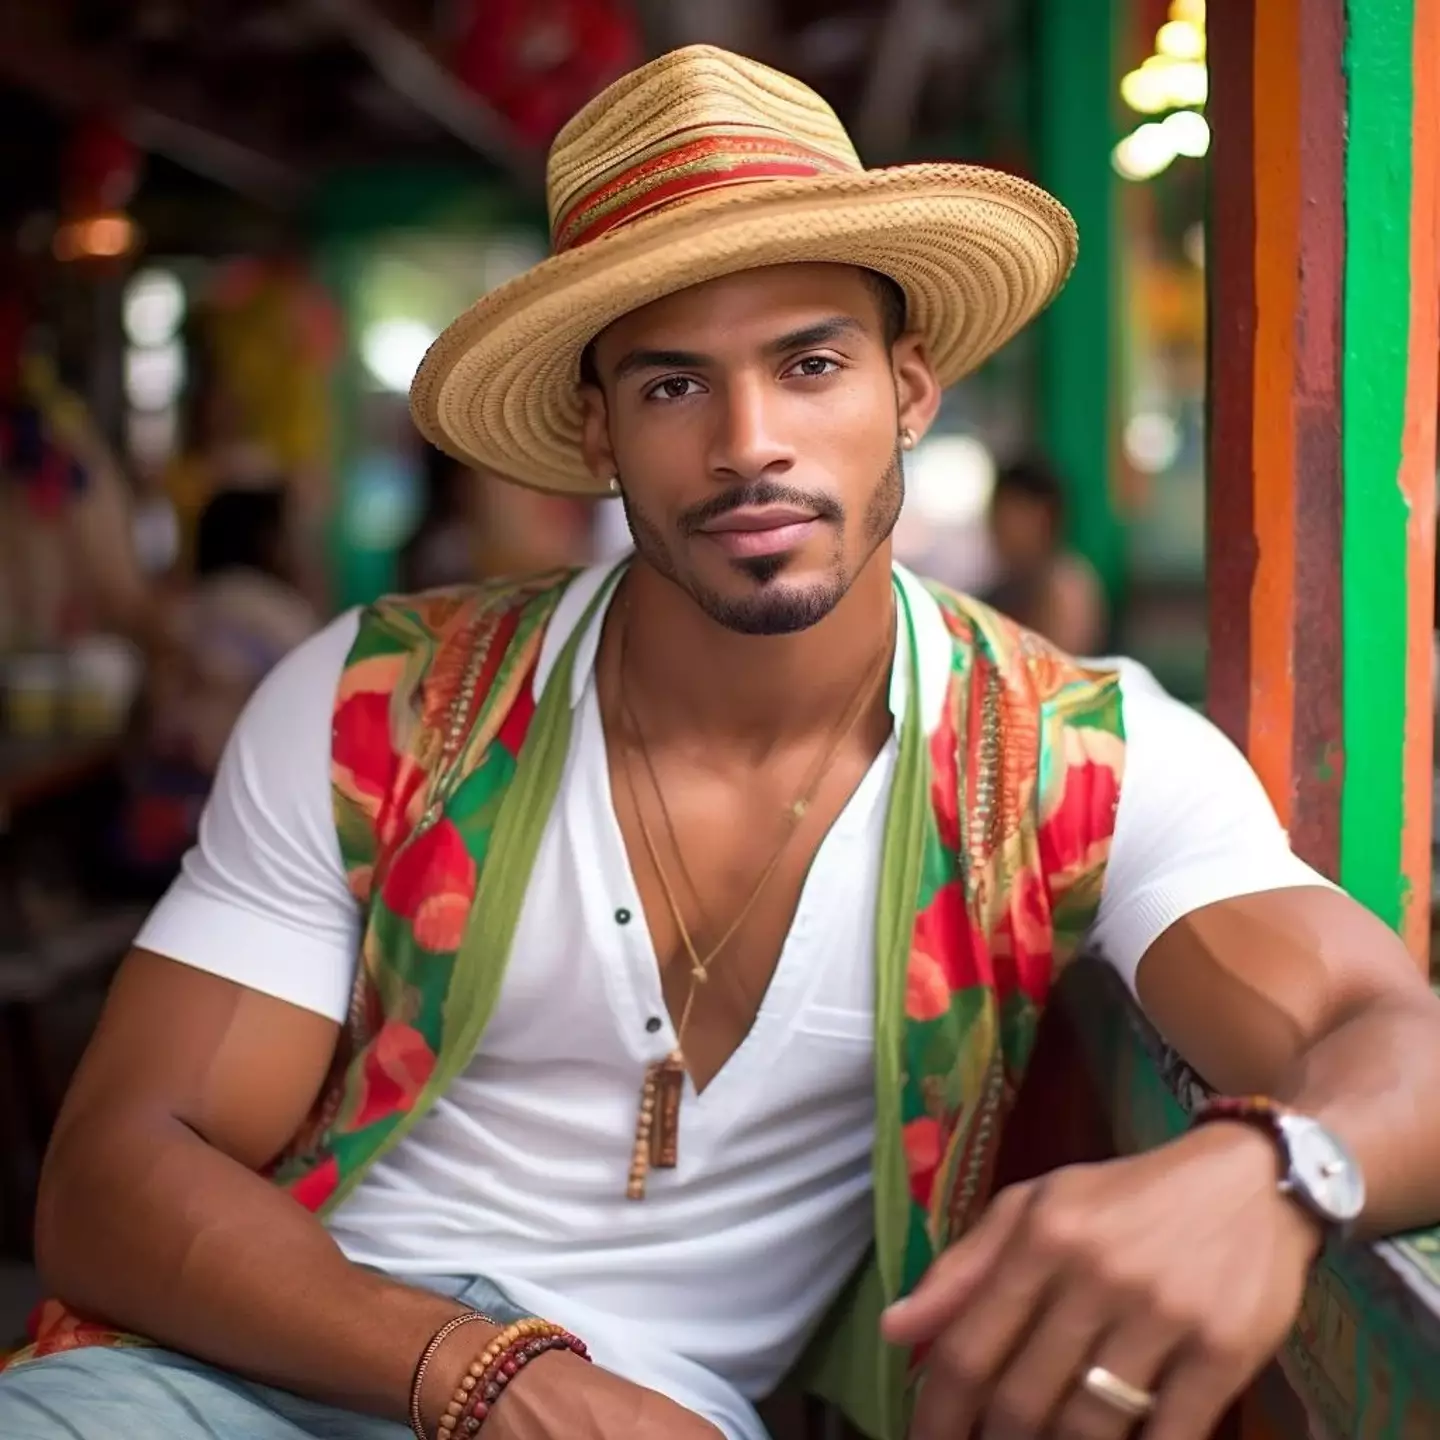 Mr Dominican Republic also styled it out with a hat.